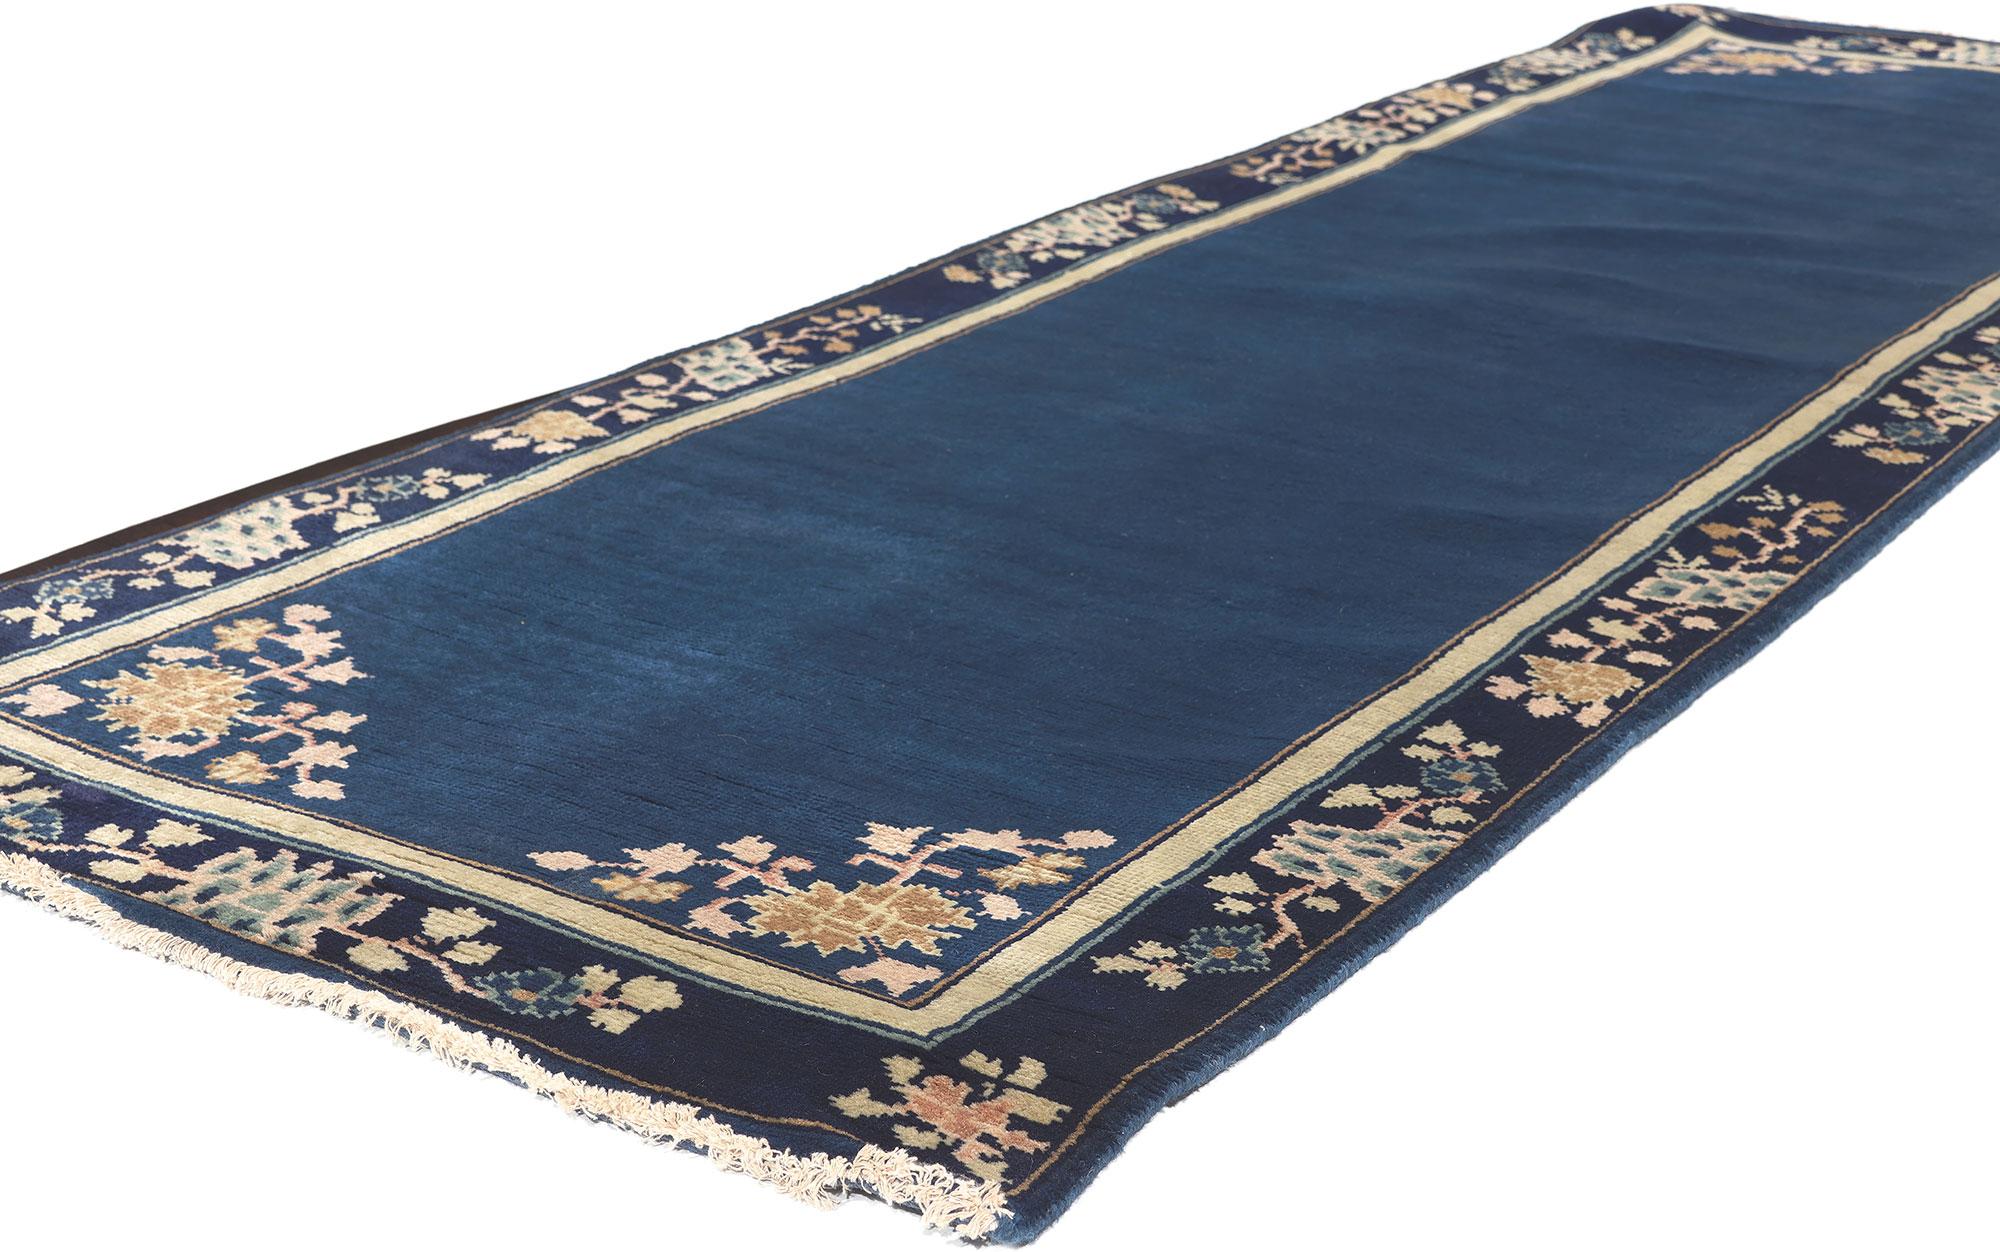 30992 Modern Chinese Art Deco Rug with Chinoiserie Chic Style, 02'06 x 08'00.
​Chinoiserie Chic meets Modern Luxe in this hand knotted wool Chinese Art Deco style runner. The timeless style and lavish texture woven into this piece work together